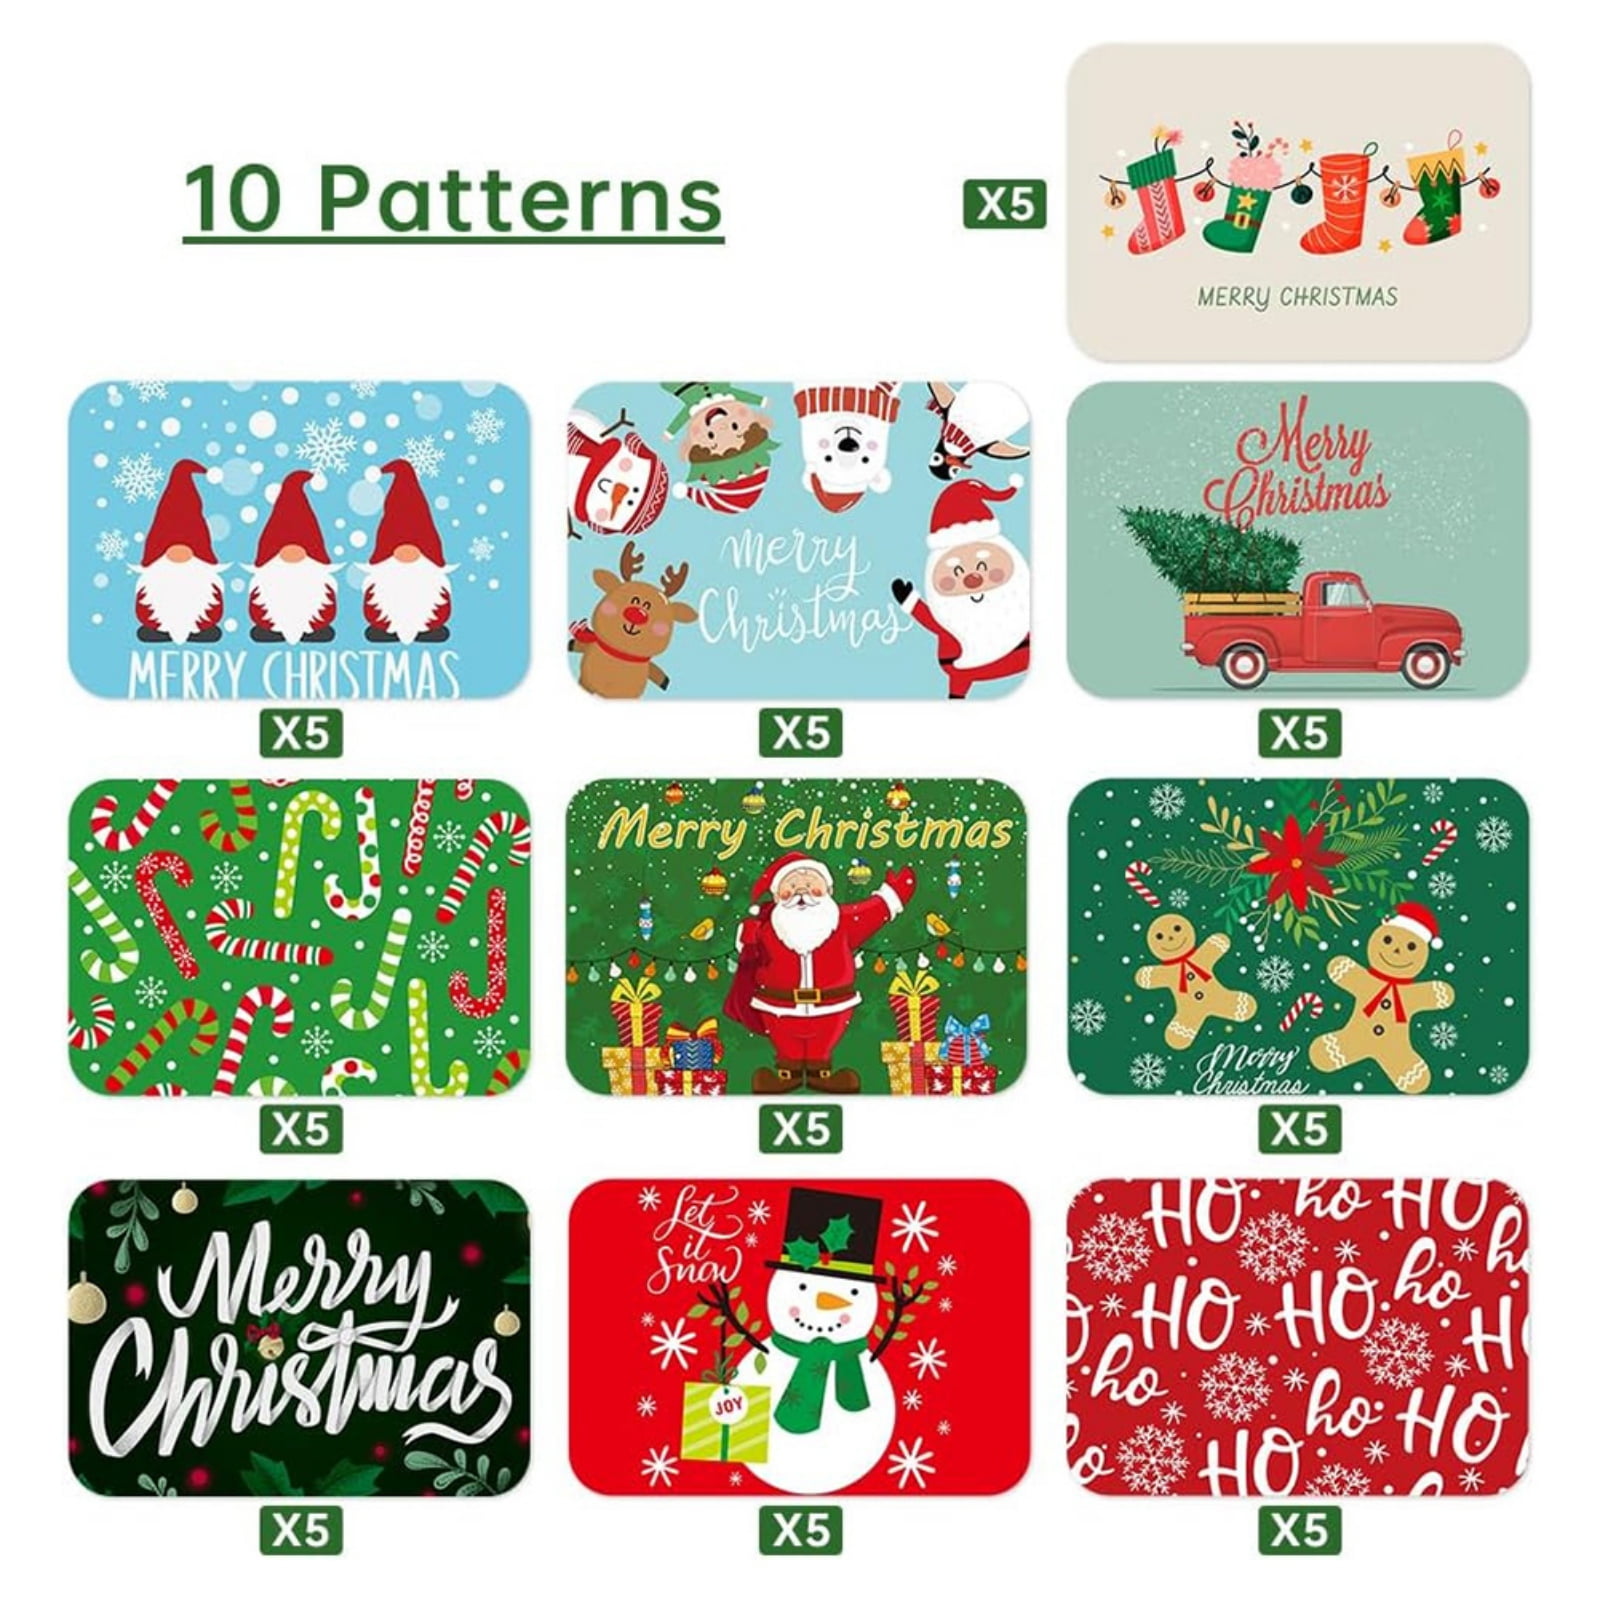 60Pcs Christmas Aluminum Pans With Lids,Disposable Food Containers Cookie  Tins for Gift Giving in 12 Holiday Designs, Takeout Foil Pans with Covers